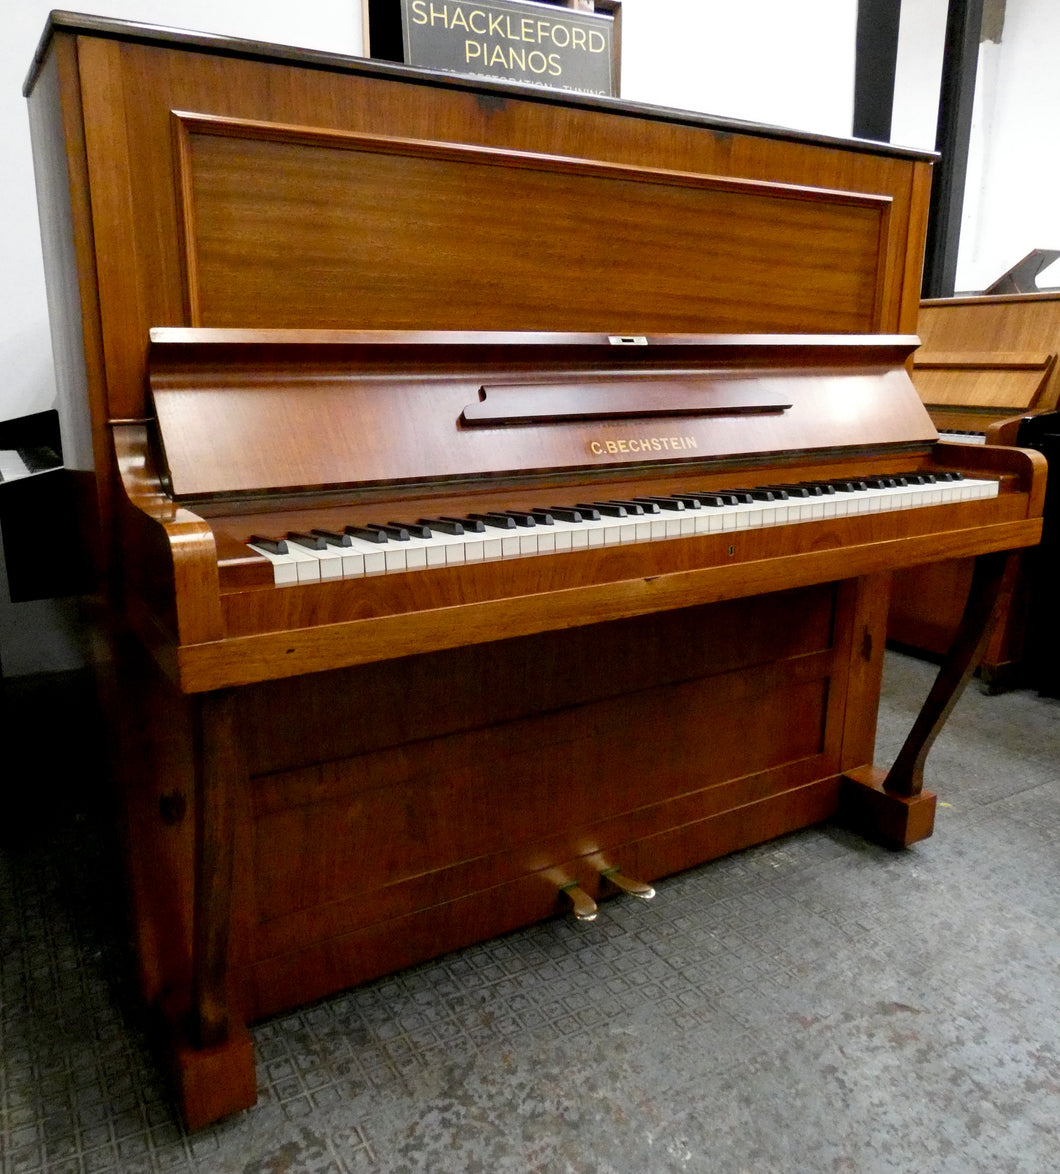  - SOLD - C. Bechstein Model V Upright Piano in Mahogany Cabinet